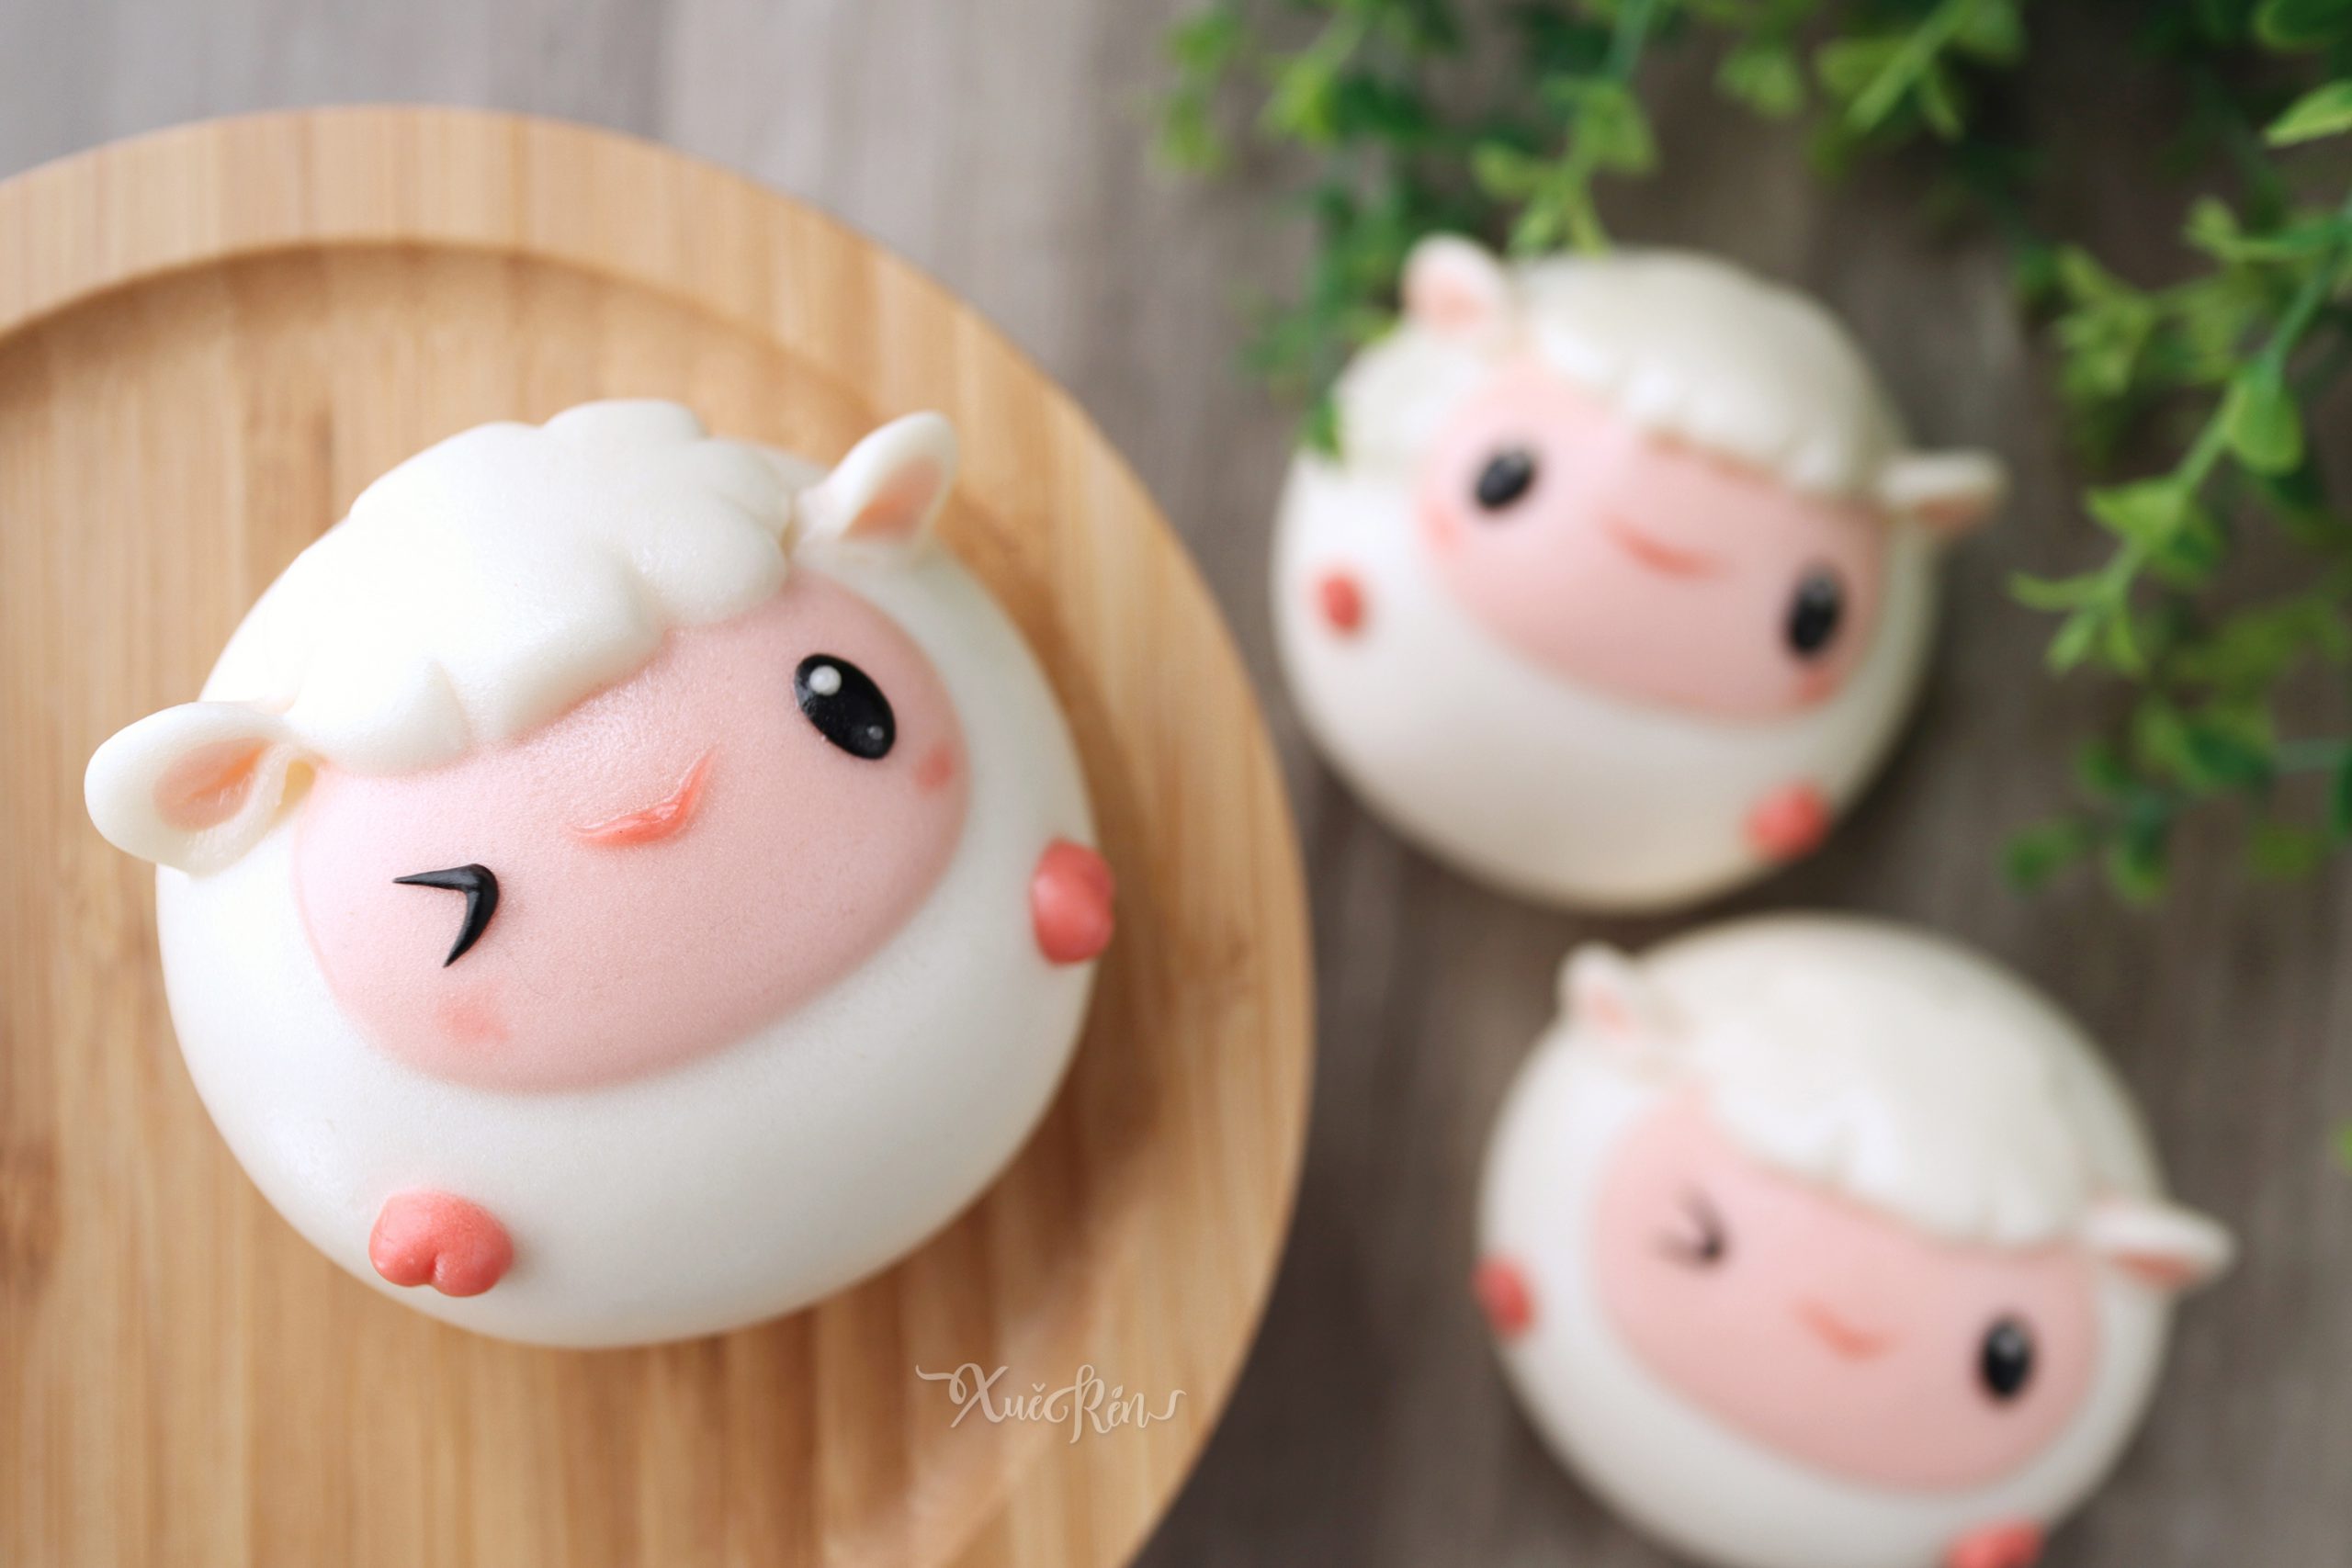 Learn the Art of Modelling Steamed Buns